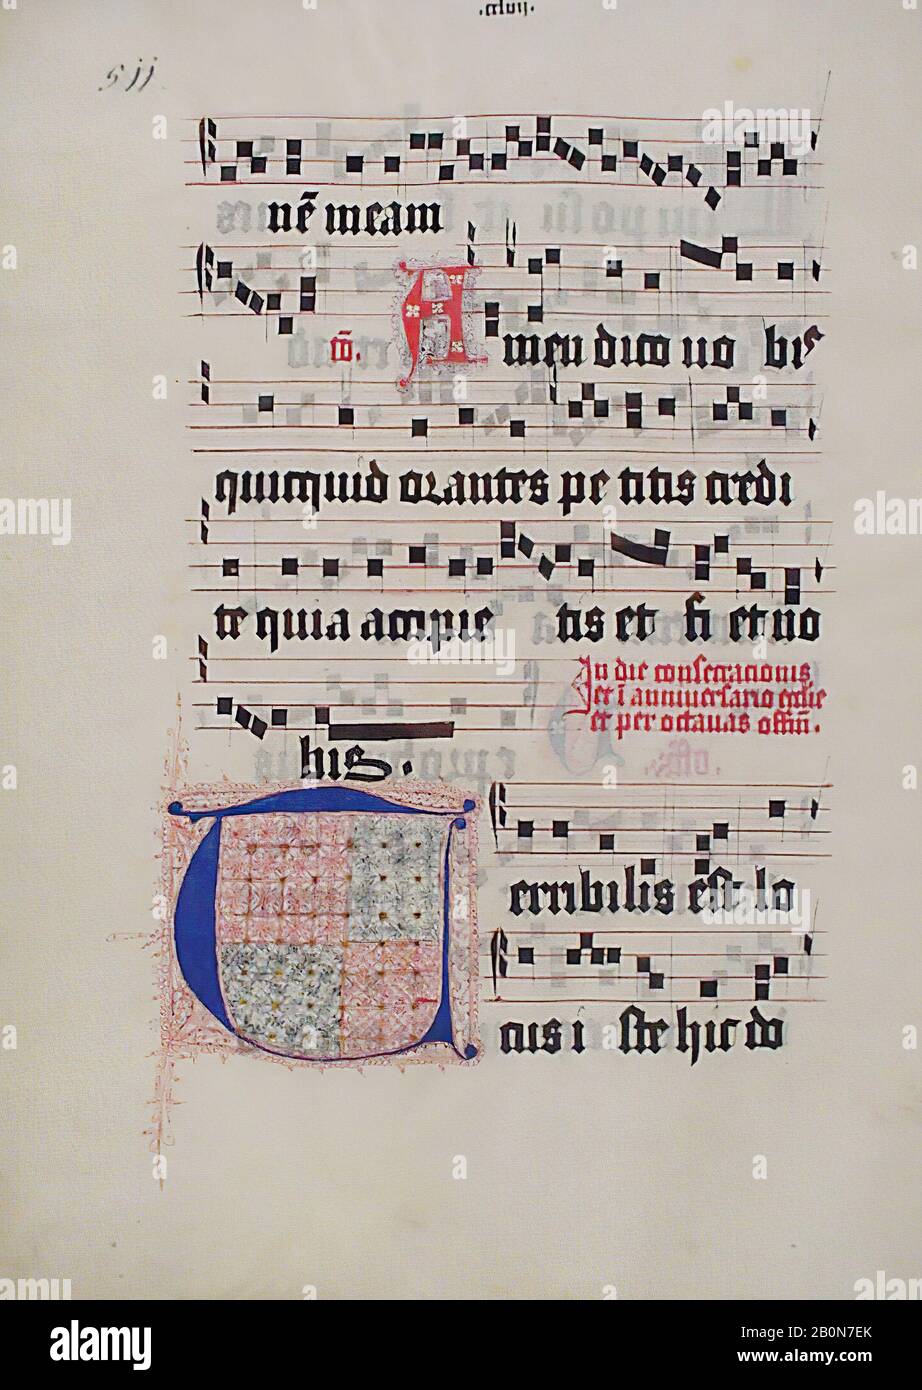 Manuscript Leaf with Initial T, from a Gradual, German, second quarter 15th century, Made in probably Mainz, Germany, German, Tempera, ink, and metal leaf on parchment, 19 3/4 x 14 3/16 in. (50.1 x 36 cm), Manuscripts and Illuminations Stock Photo